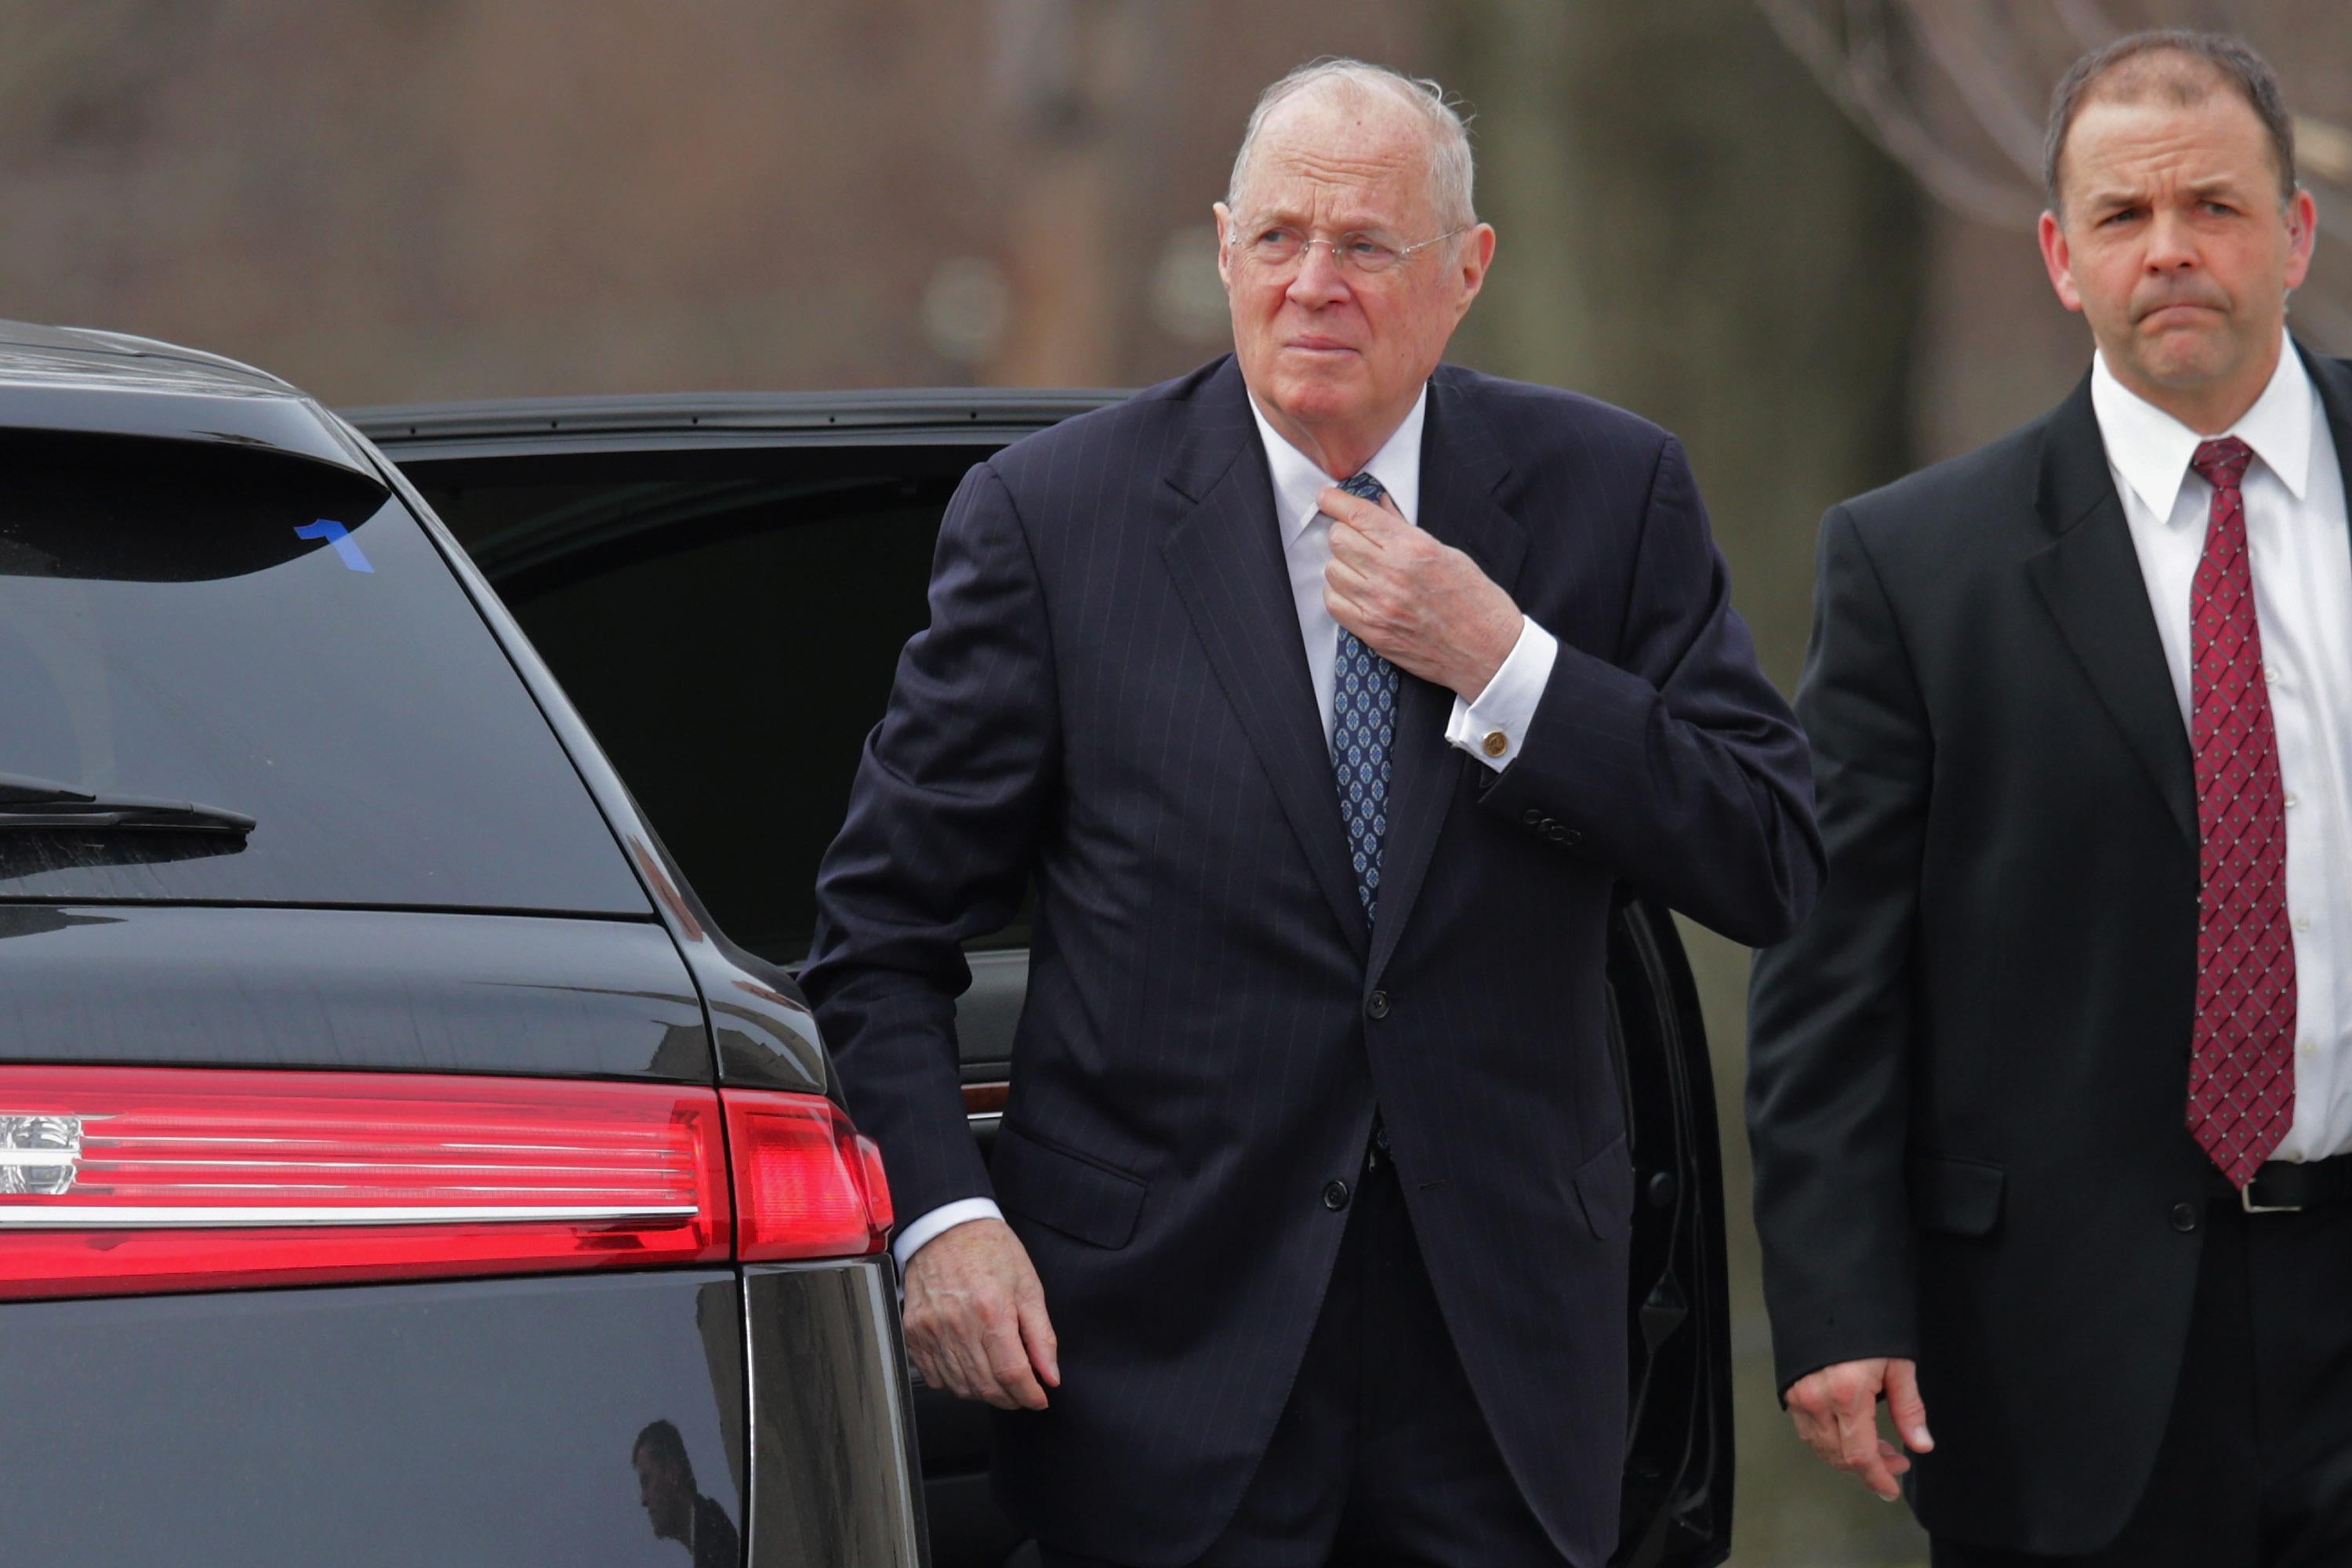 U.S. Supreme Court Associate Justice Anthony Kennedy arrives for the funeral of fellow Associate Justice Antonin Scalia in 2016.